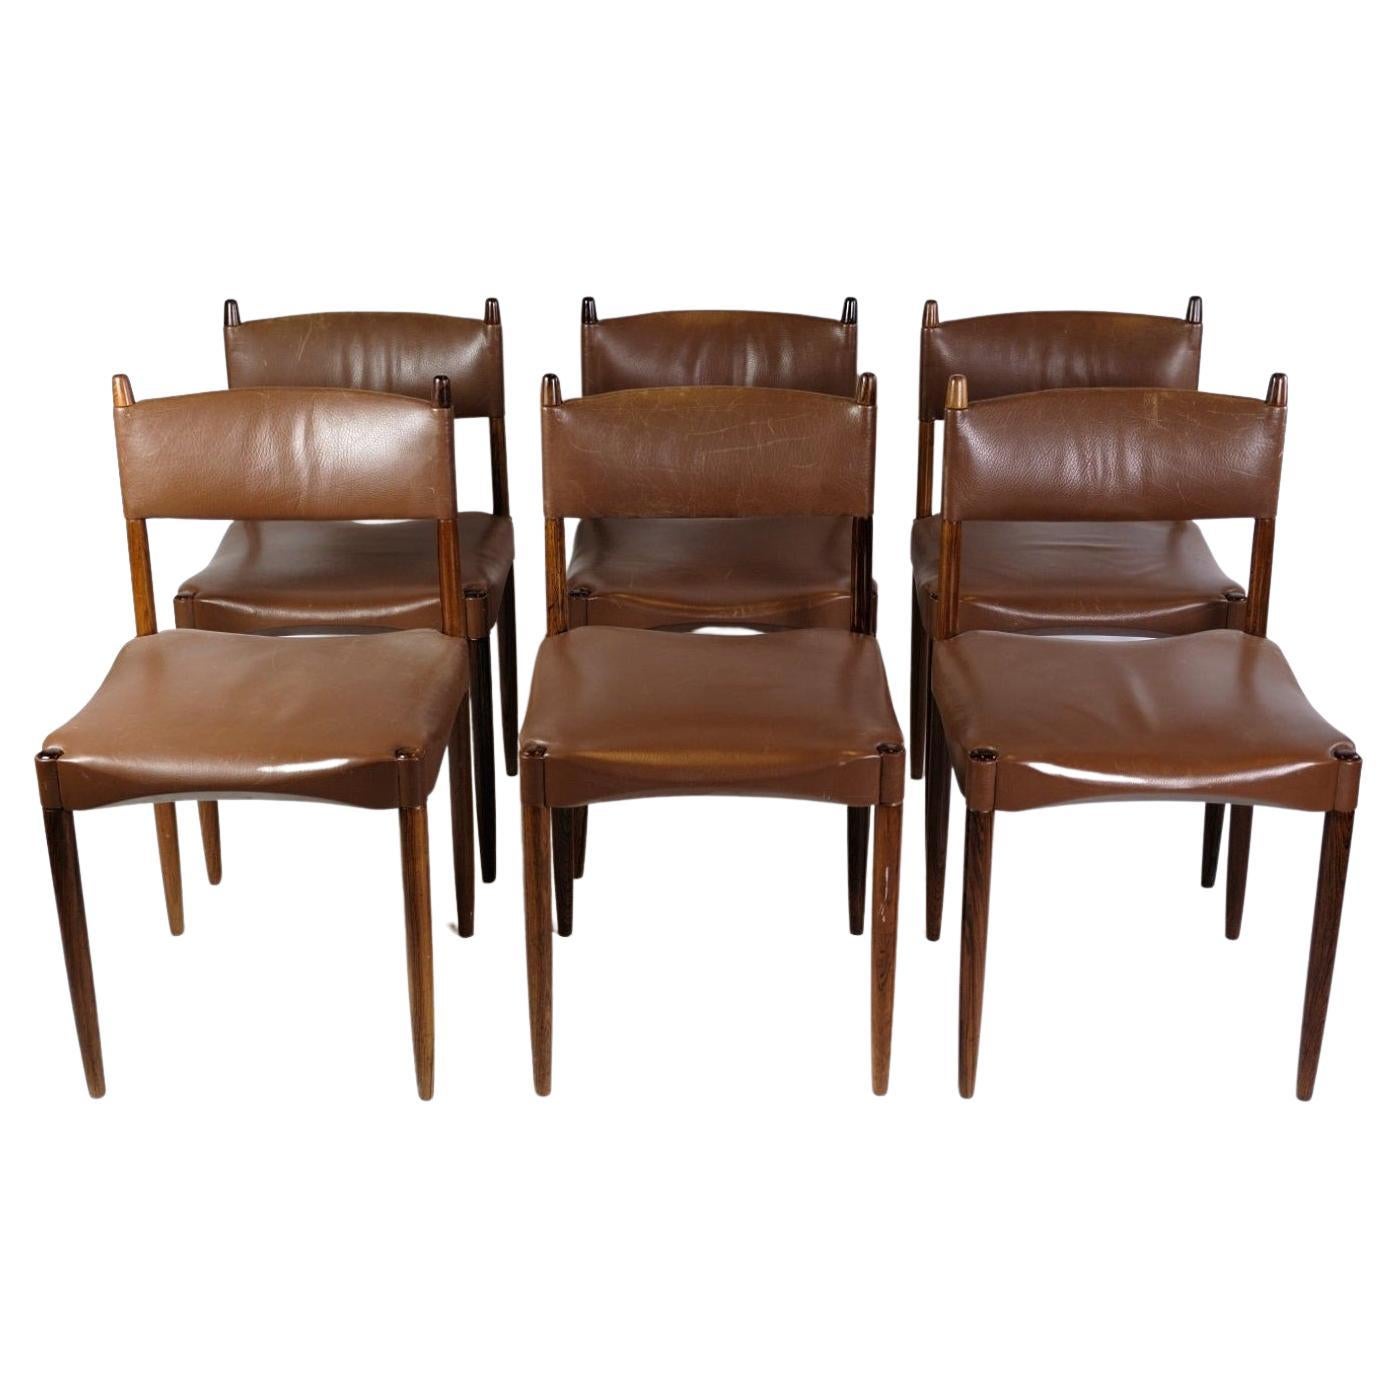 Set of 6 Chairs Made Of Solid Rosewood From 1960s For Sale